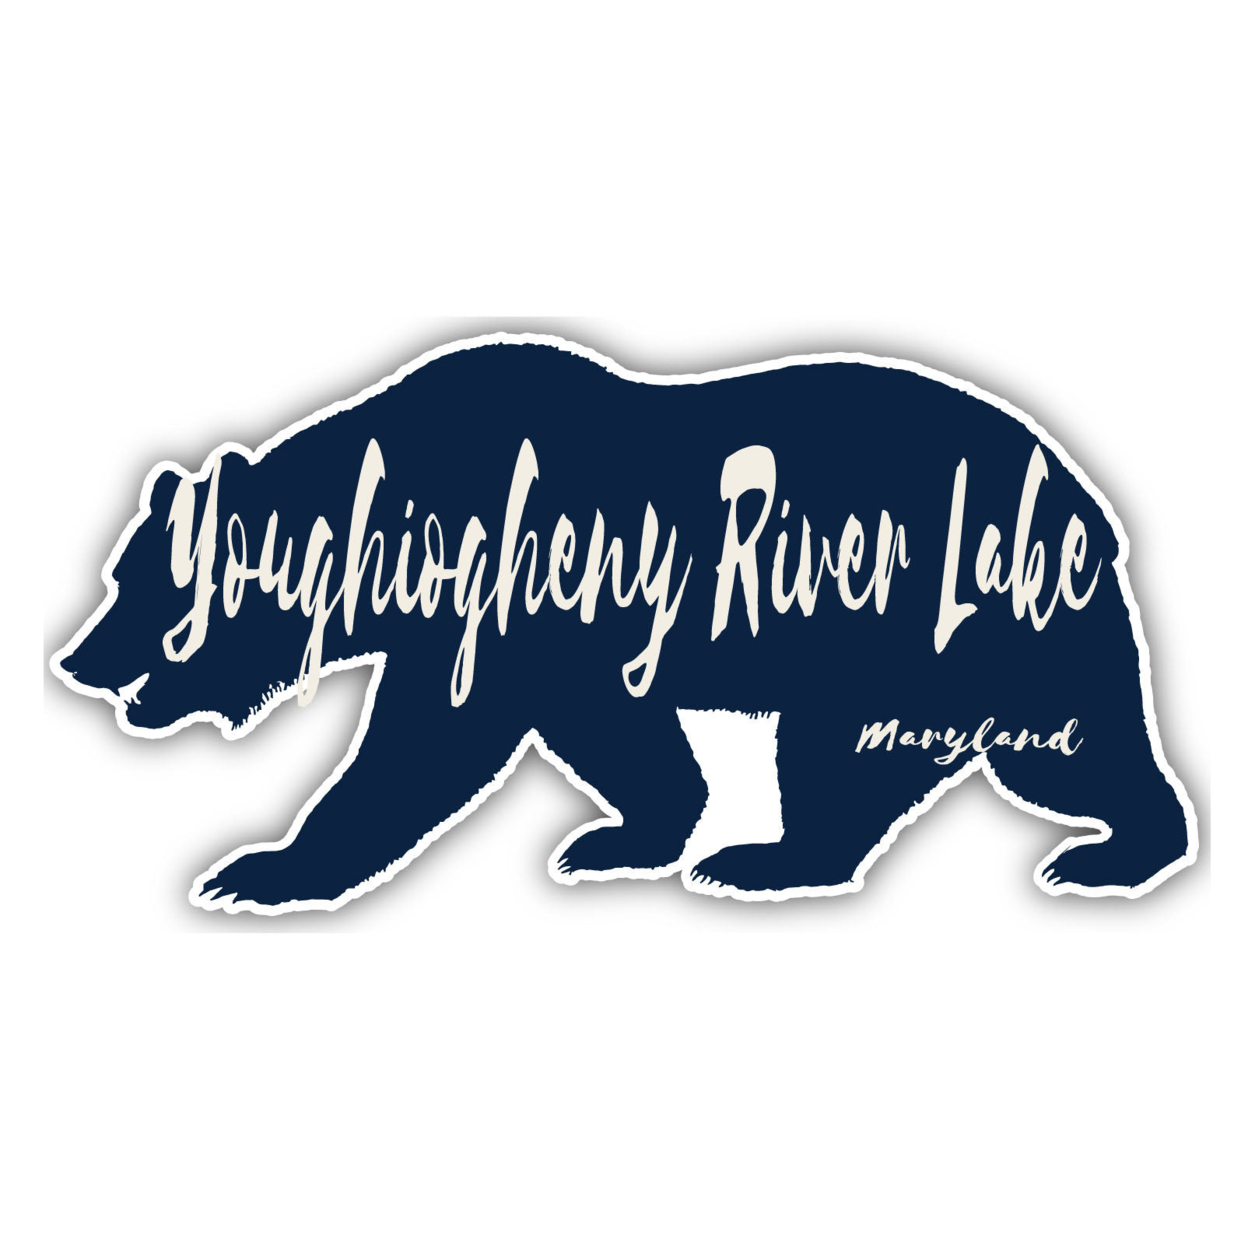 Youghiogheny River Lake Maryland Souvenir Decorative Stickers (Choose Theme And Size) - Single Unit, 2-Inch, Bear